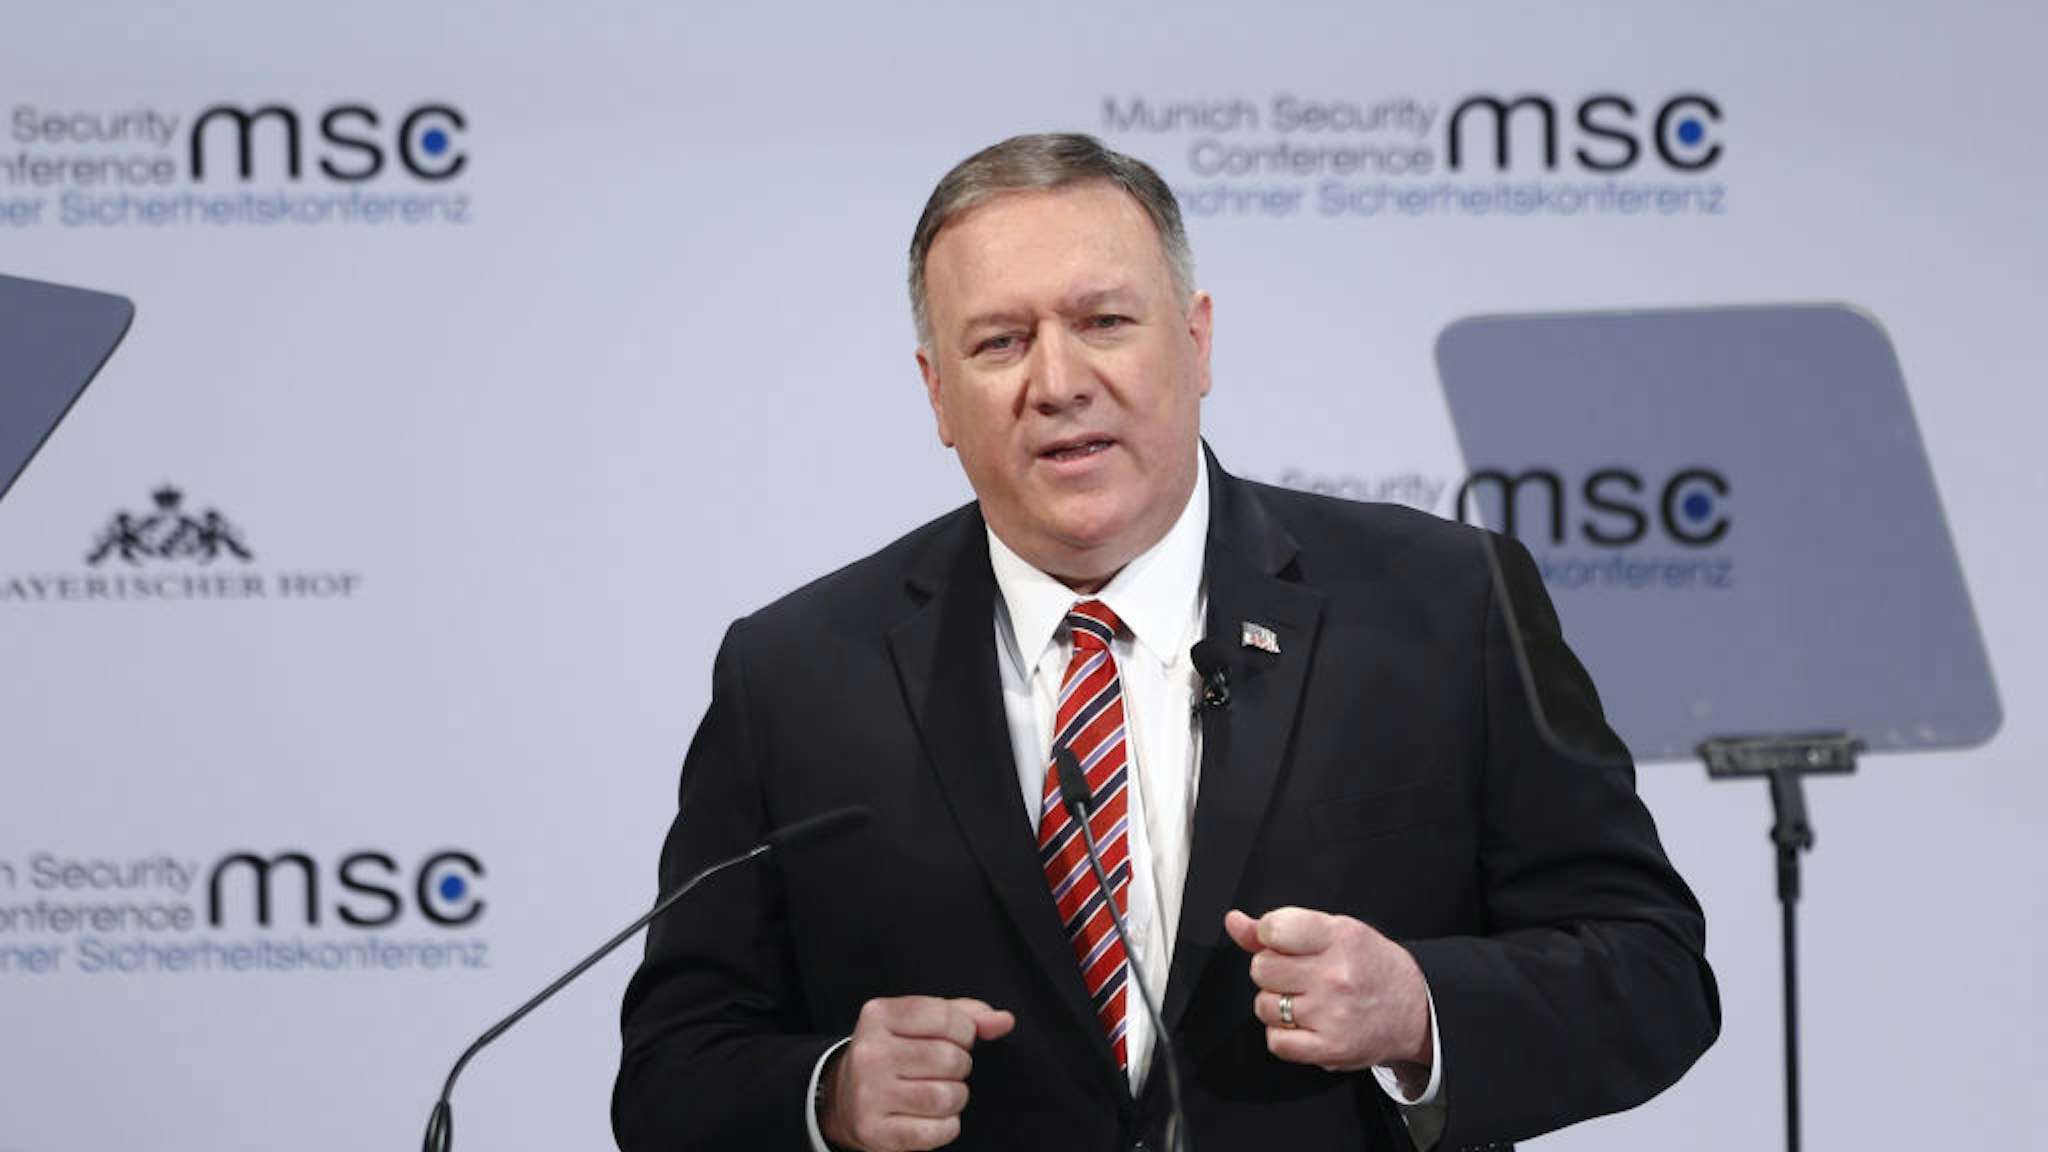 Mike Pompeo, U.S. secretary of state, speaks during the Munich Security Conference at the Bayerischer Hof hotel in Munich, Germany, on Saturday, Feb. 15, 2020.